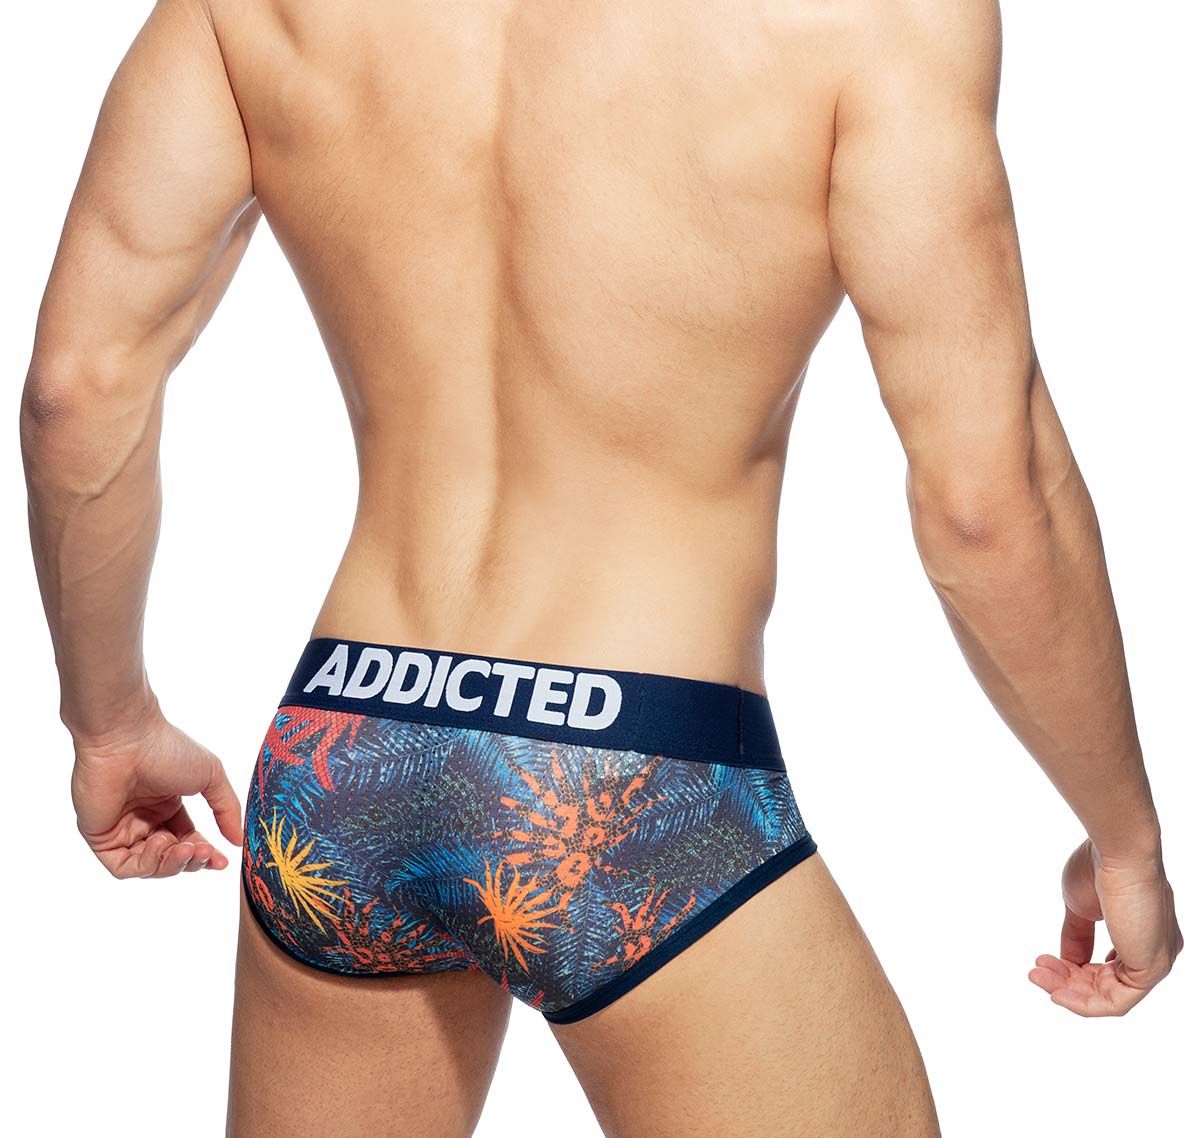 Addicted 3er Pack Slips 3 PACK TROPICAL MESH BRIEF PUSH UP, AD889P, mehrfarbig